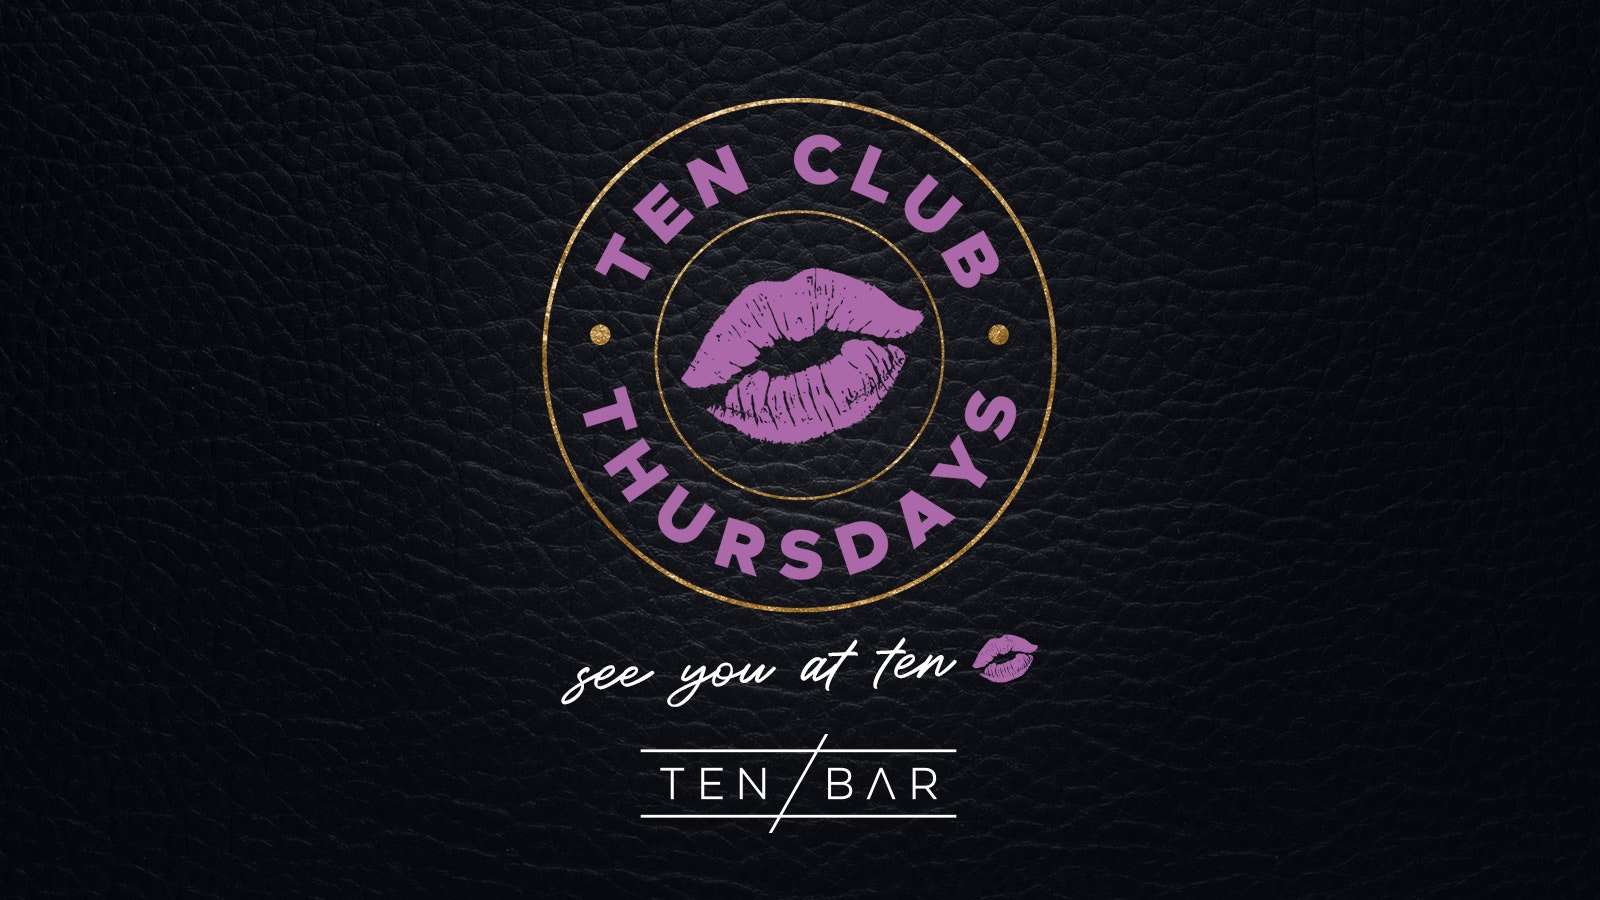 Ten Club Thursdays (Members Exclusive Drinks Deals Wristband) Free Entry all night long, Open from 9pm – 12th October